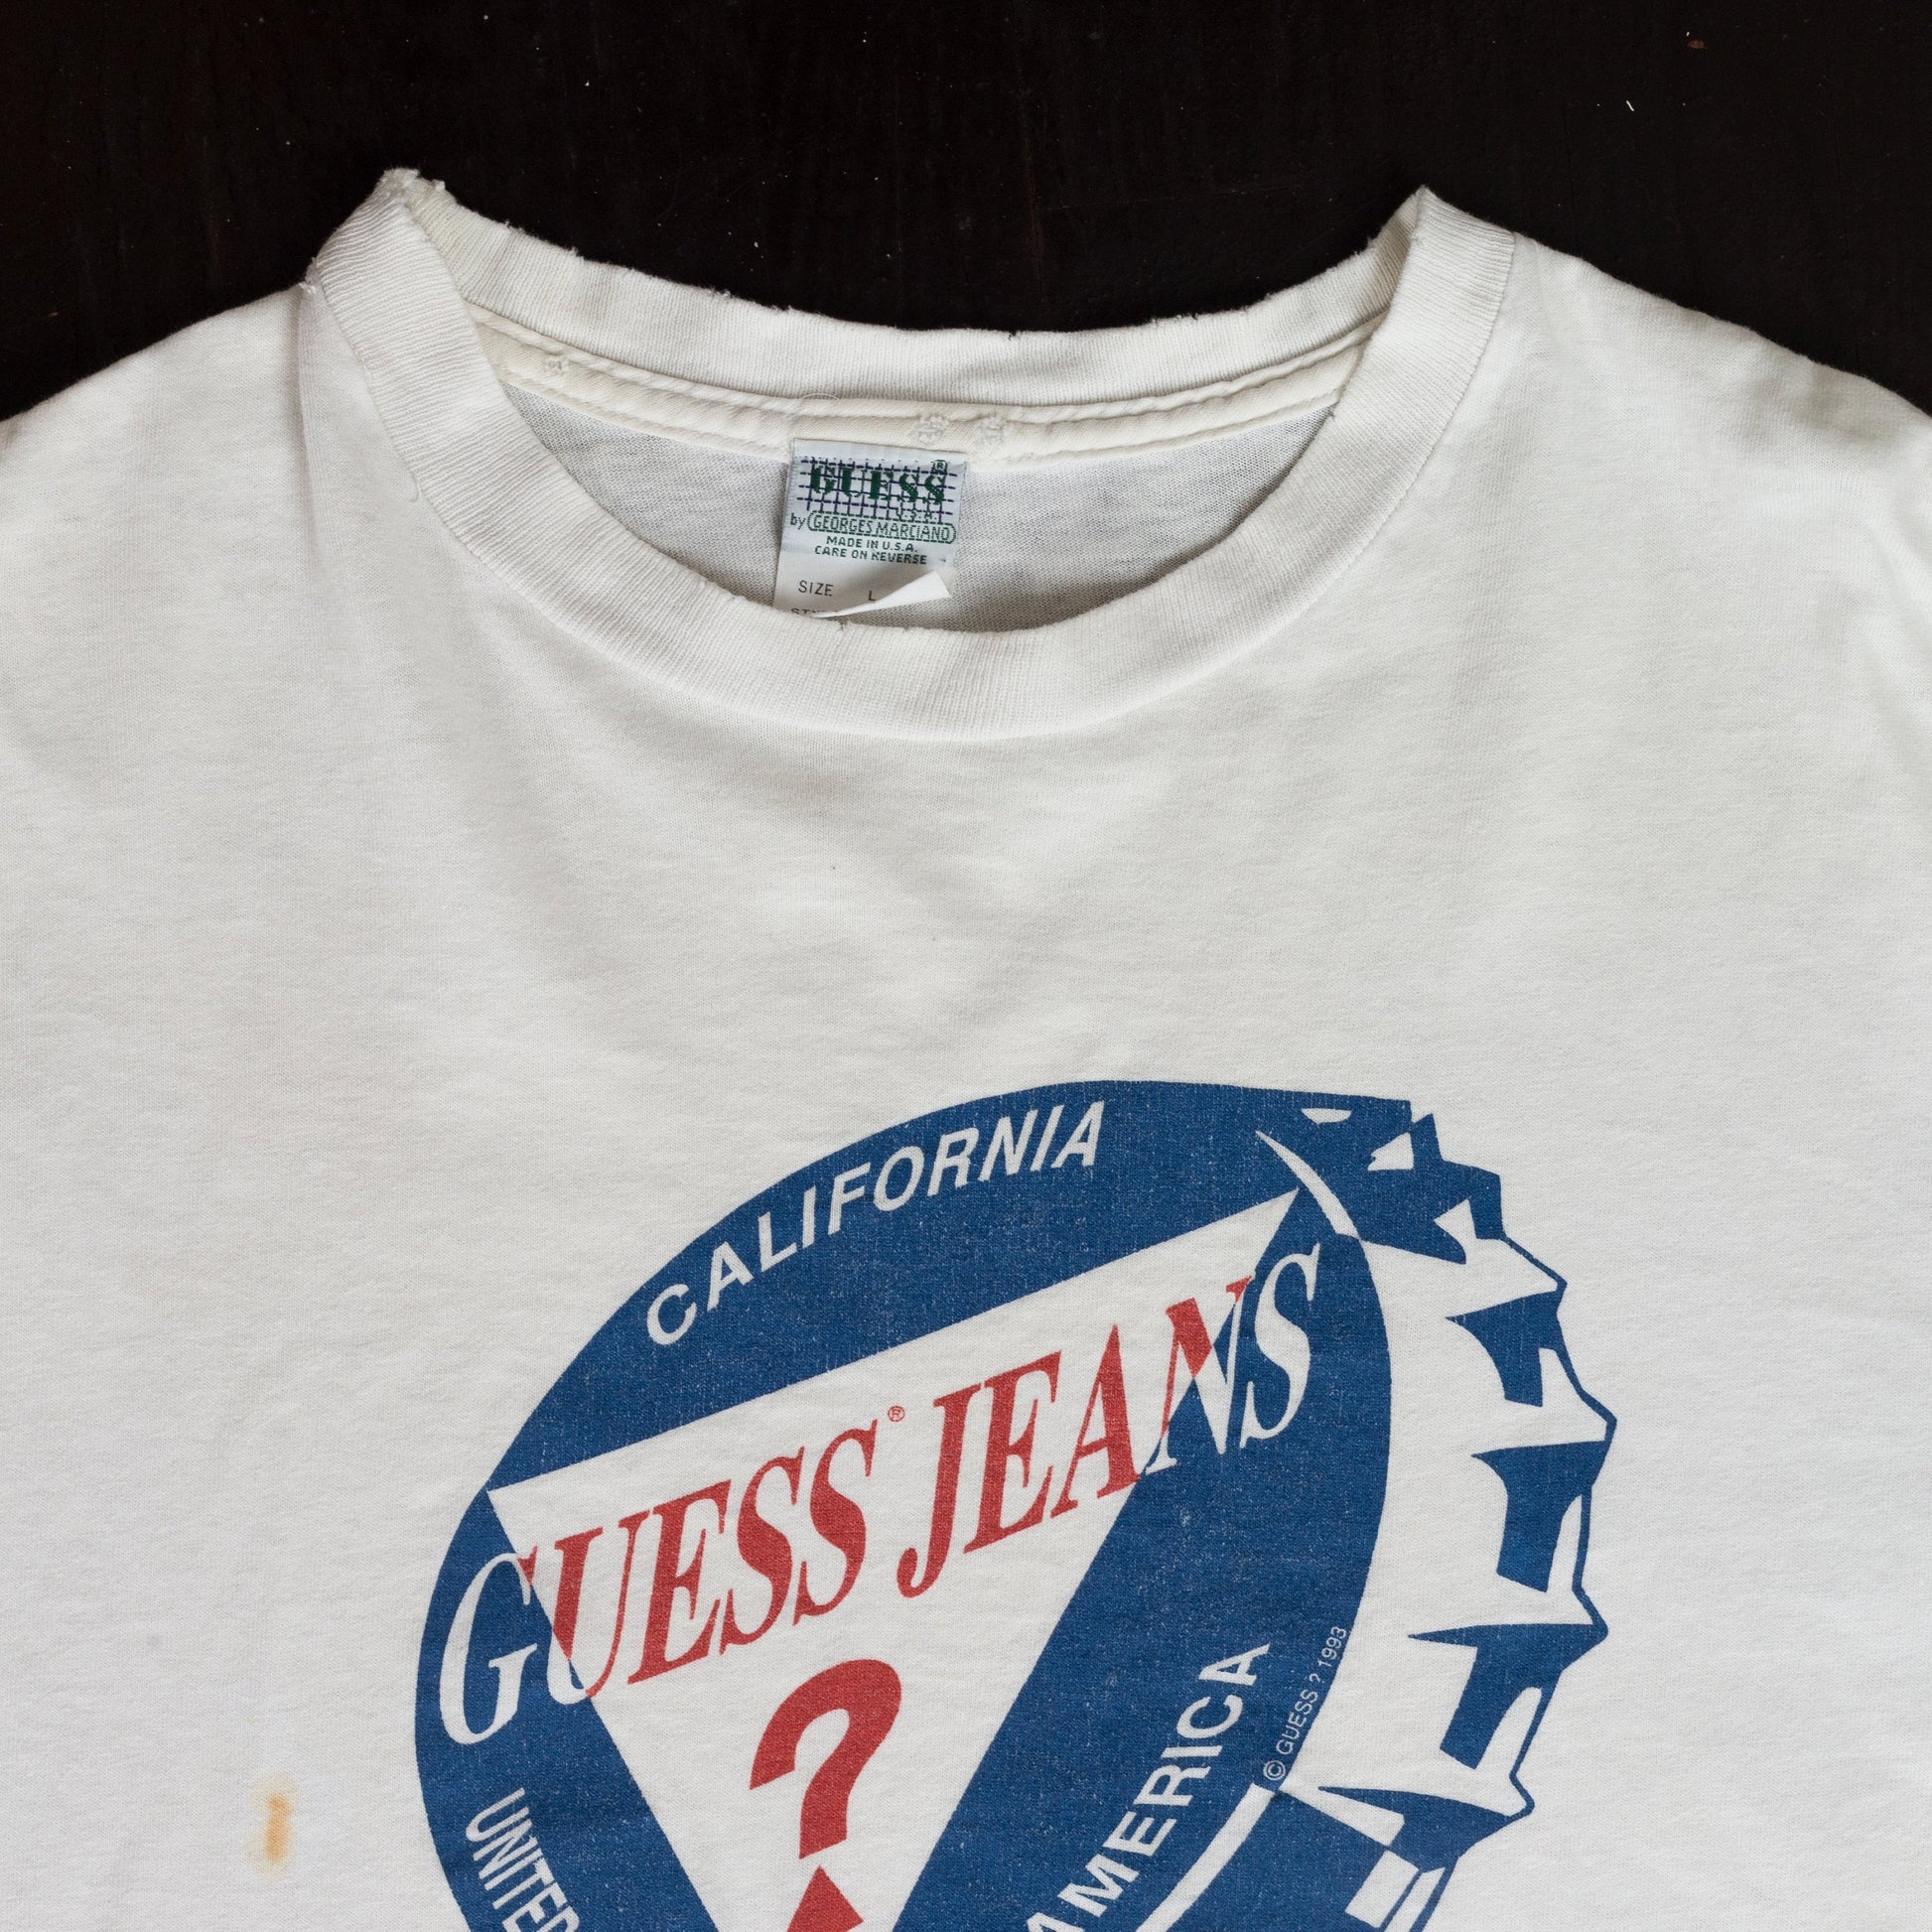 Vintage 90s Guess Jeans T Shirt - Men&#39;s Large, Women&#39;s XL | Distressed Georges Marciano Bottle Cap Graphic Tee